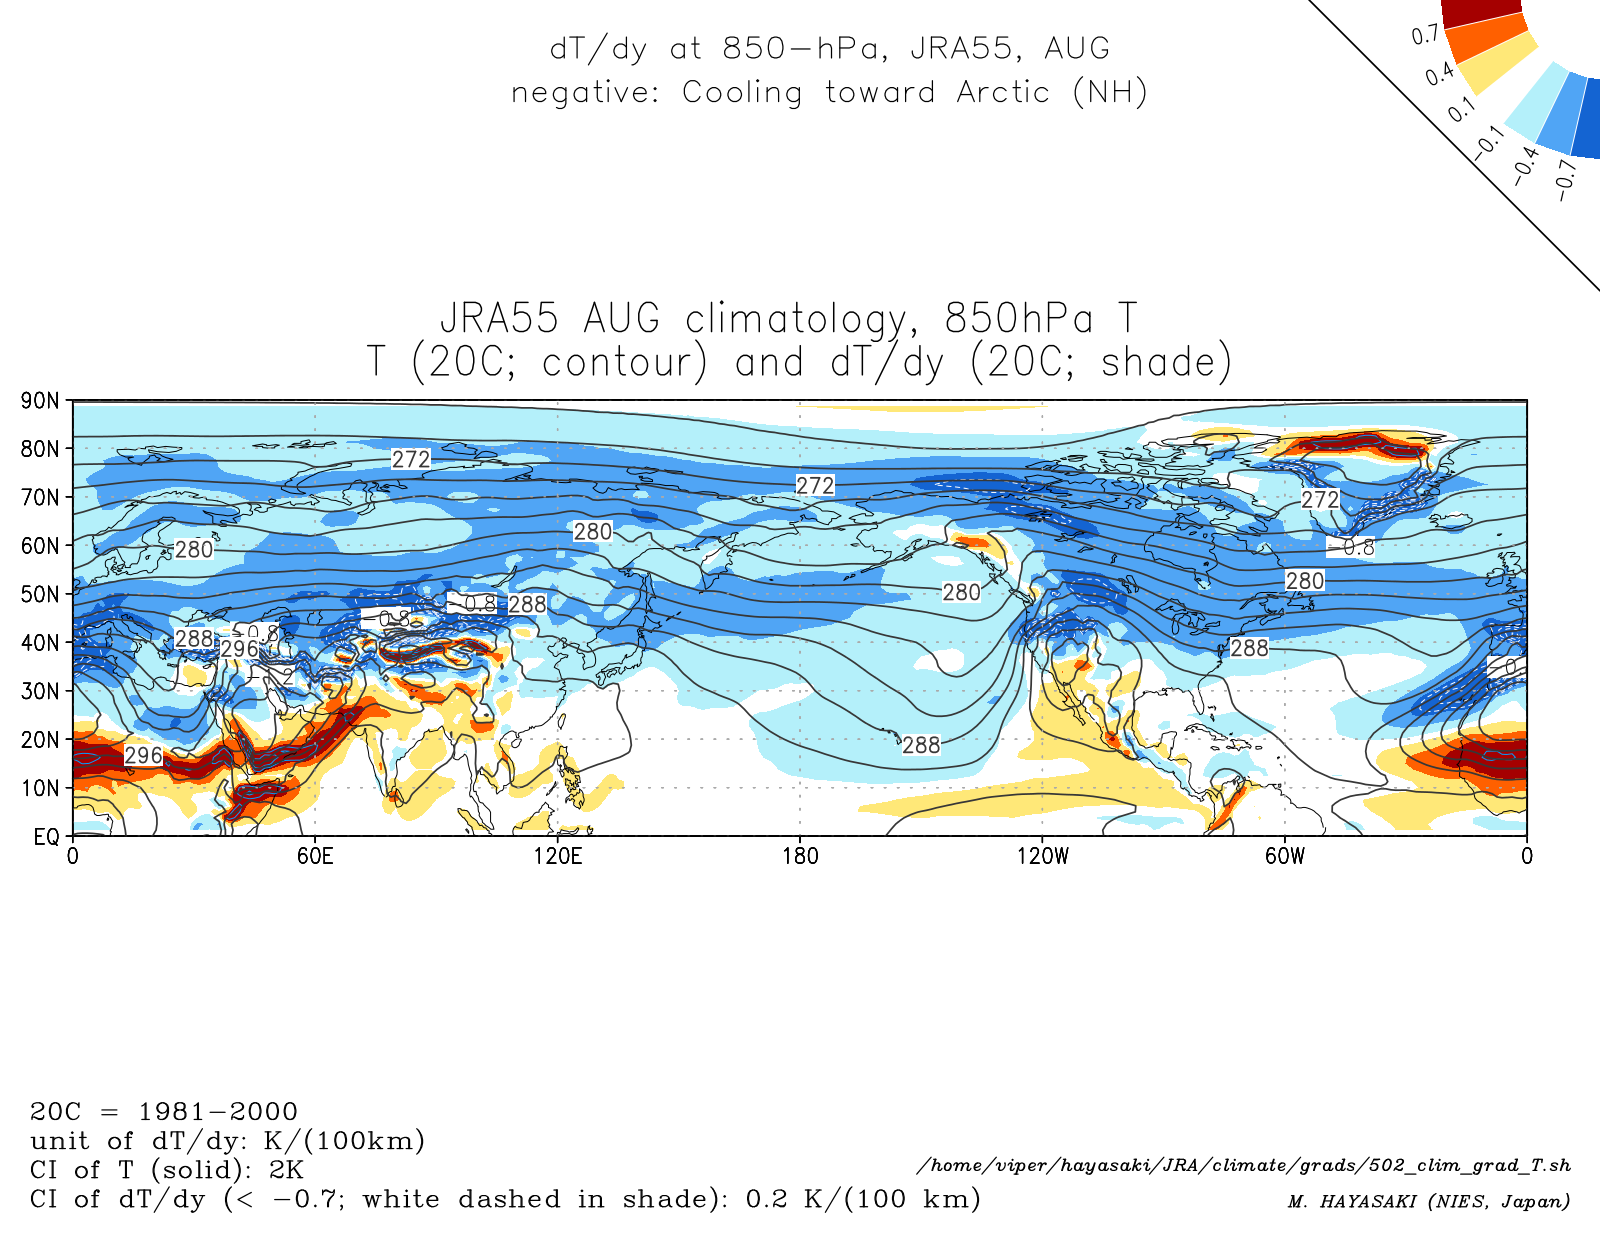 Monthly climatology (August) of dT/dy at 850-hPa in the NH